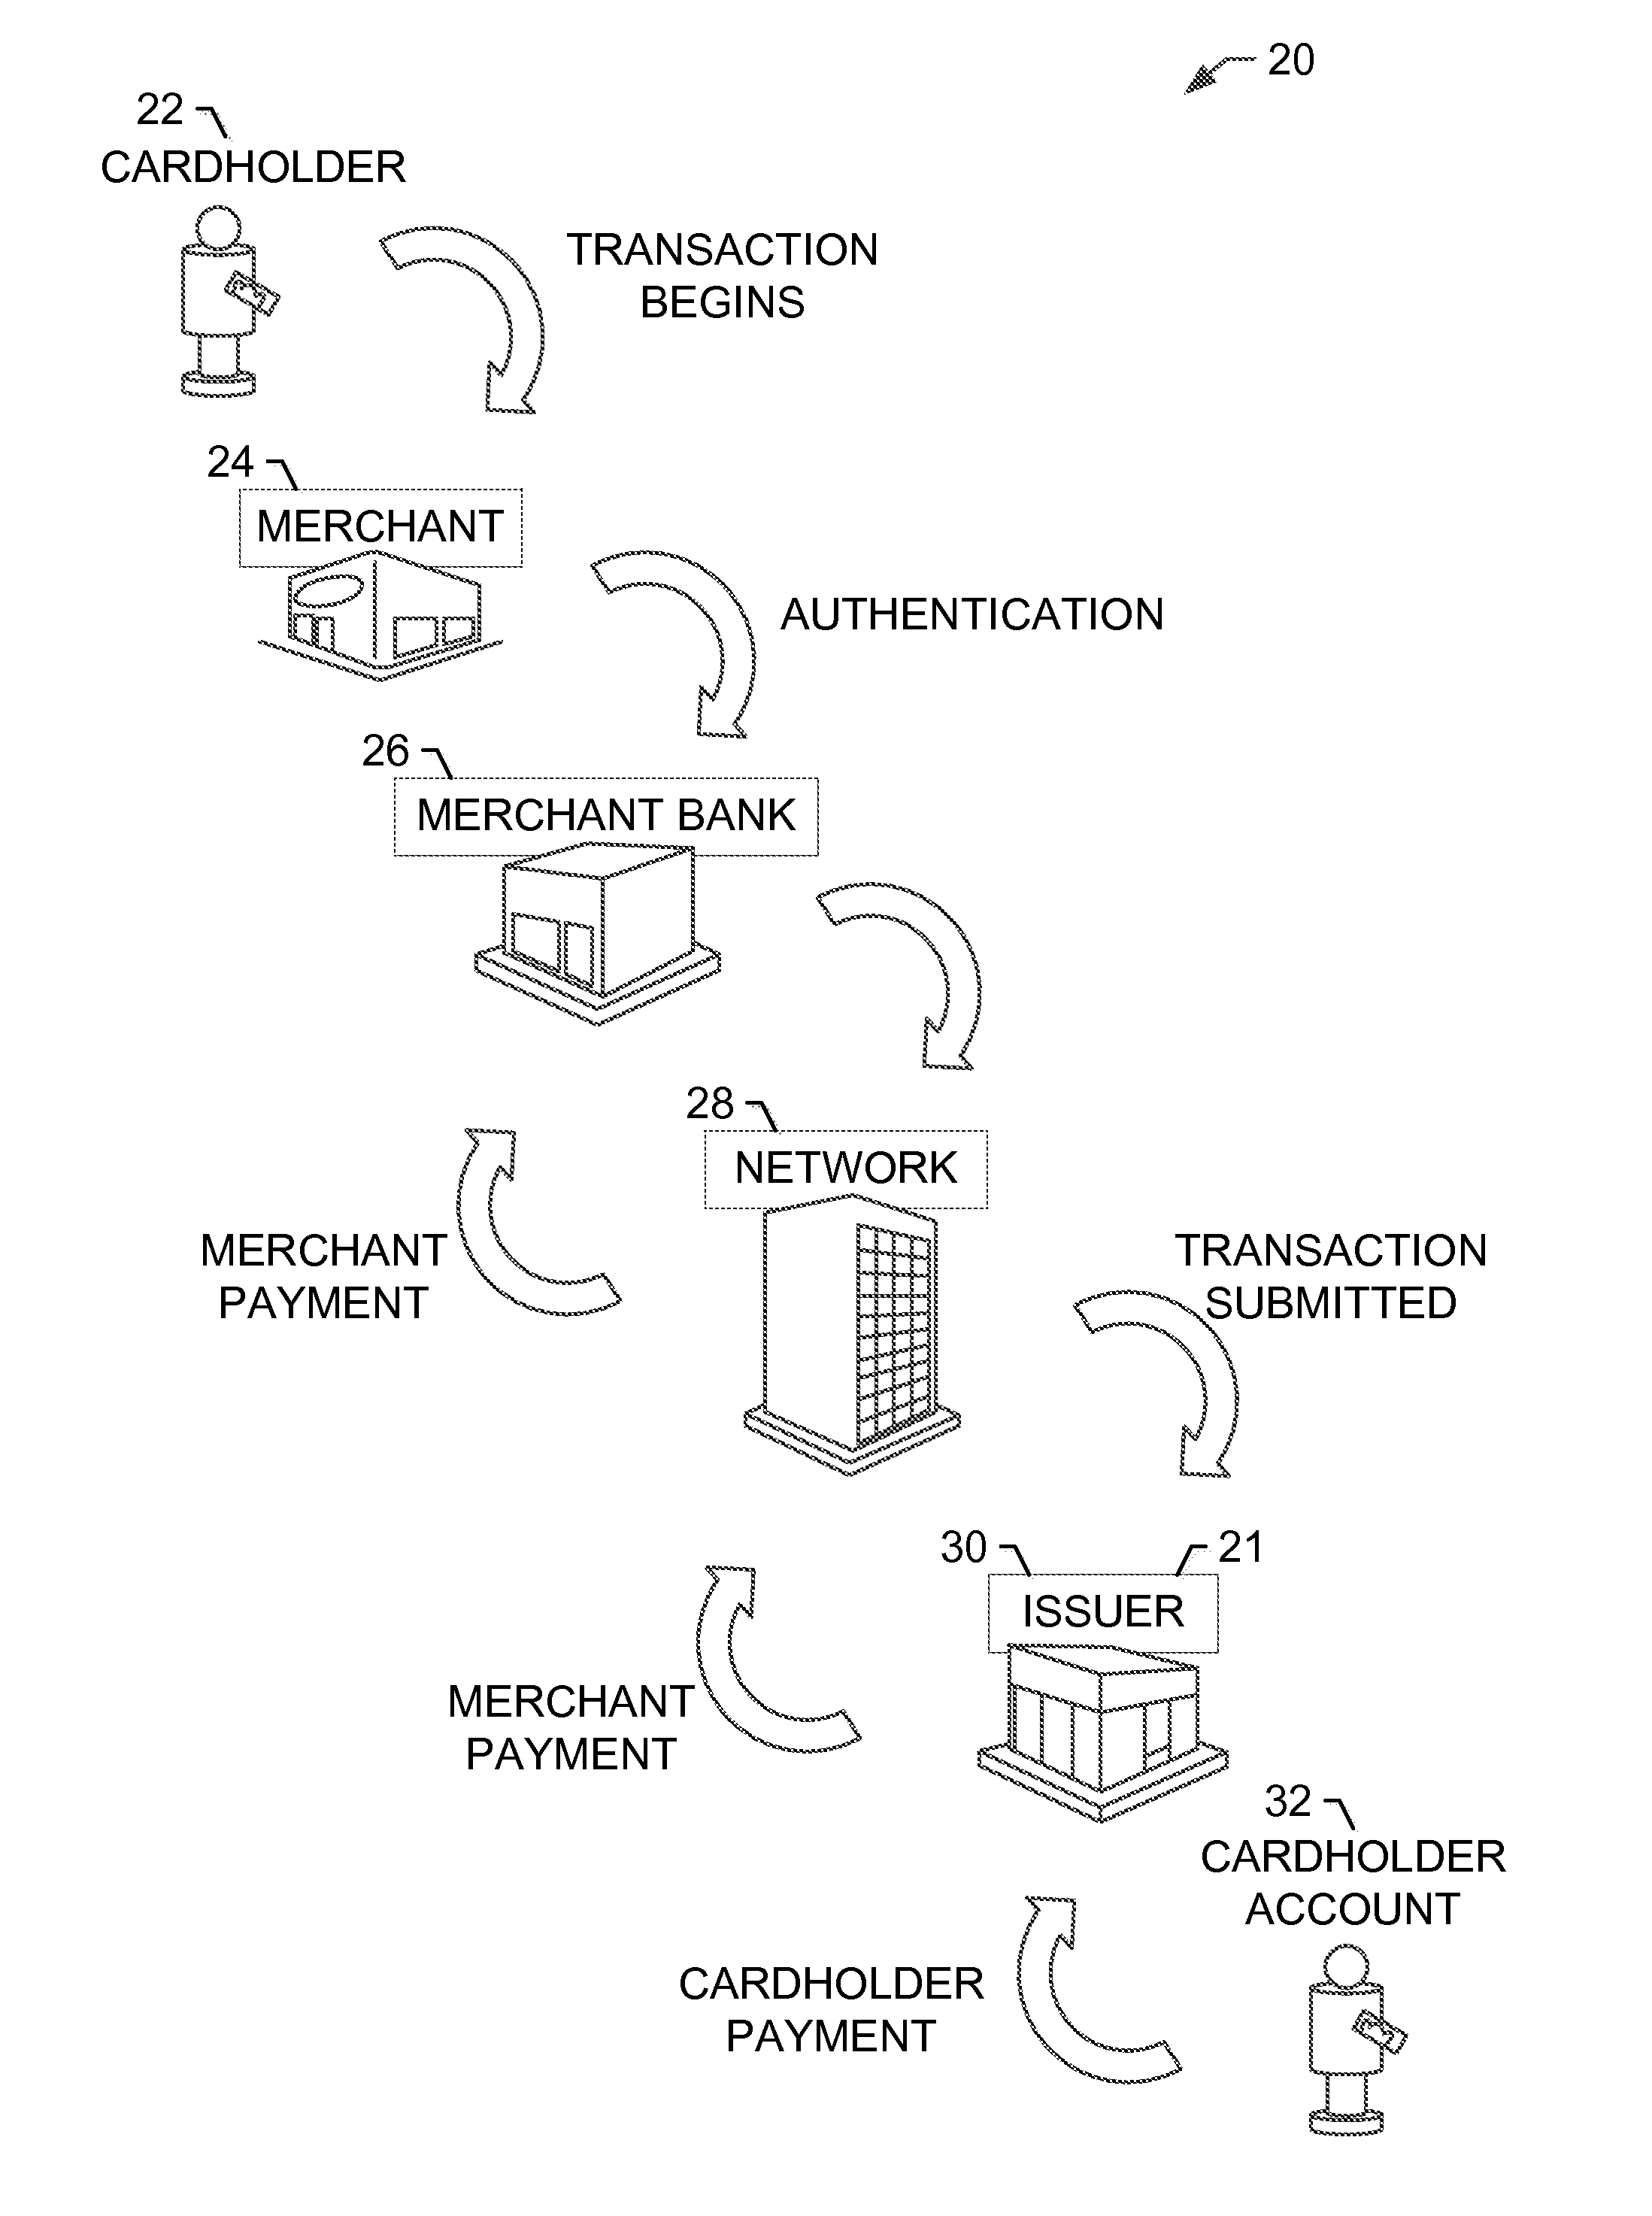 Systems and methods for customer service access to a consumer interface system